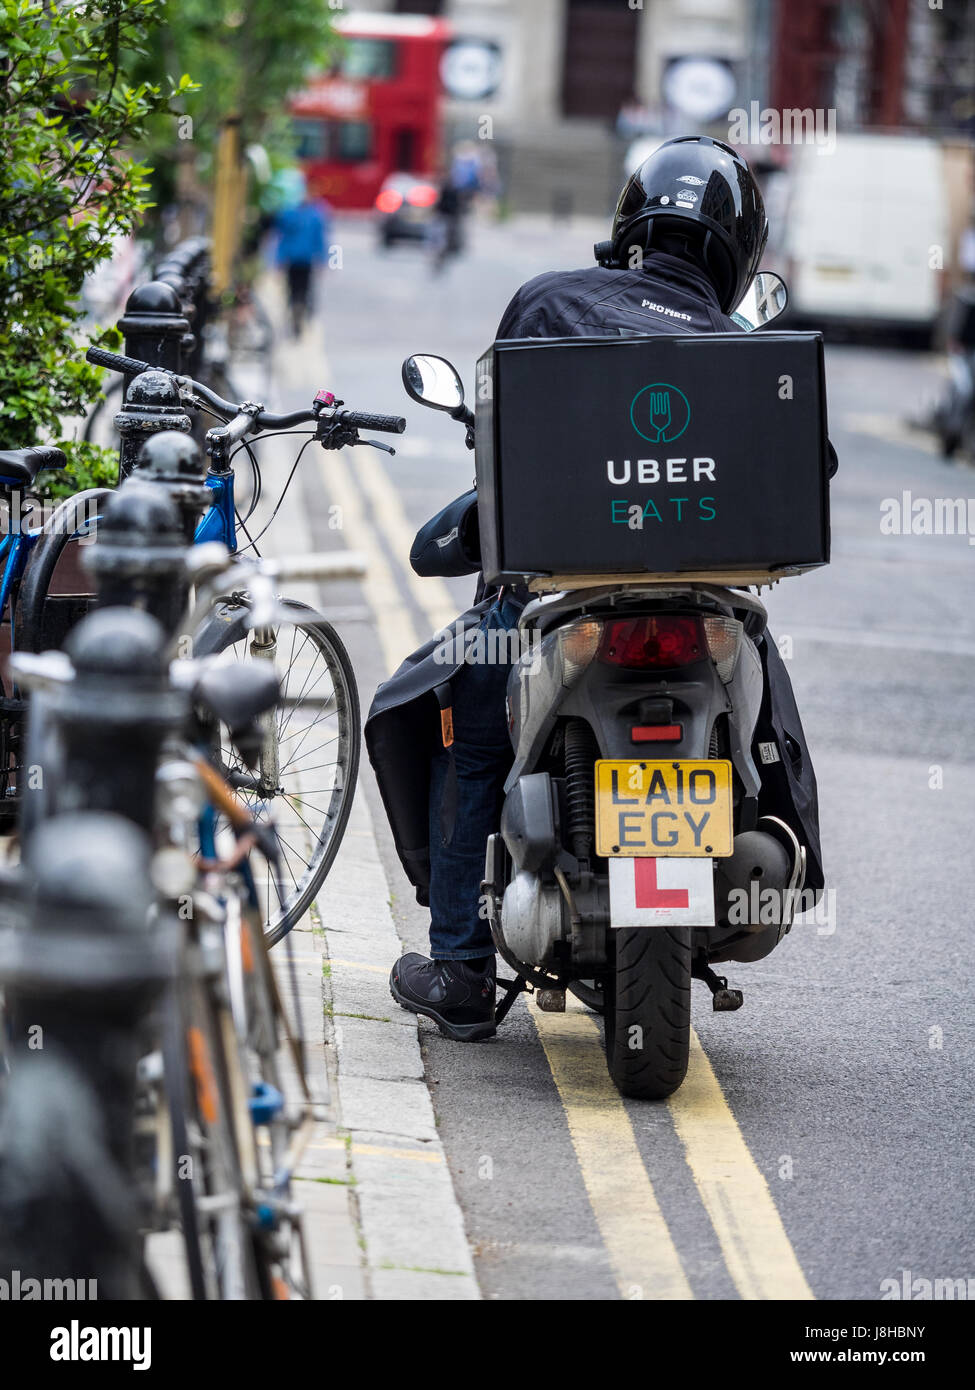 An Uber Eats food delivery courier waits for work in Central London